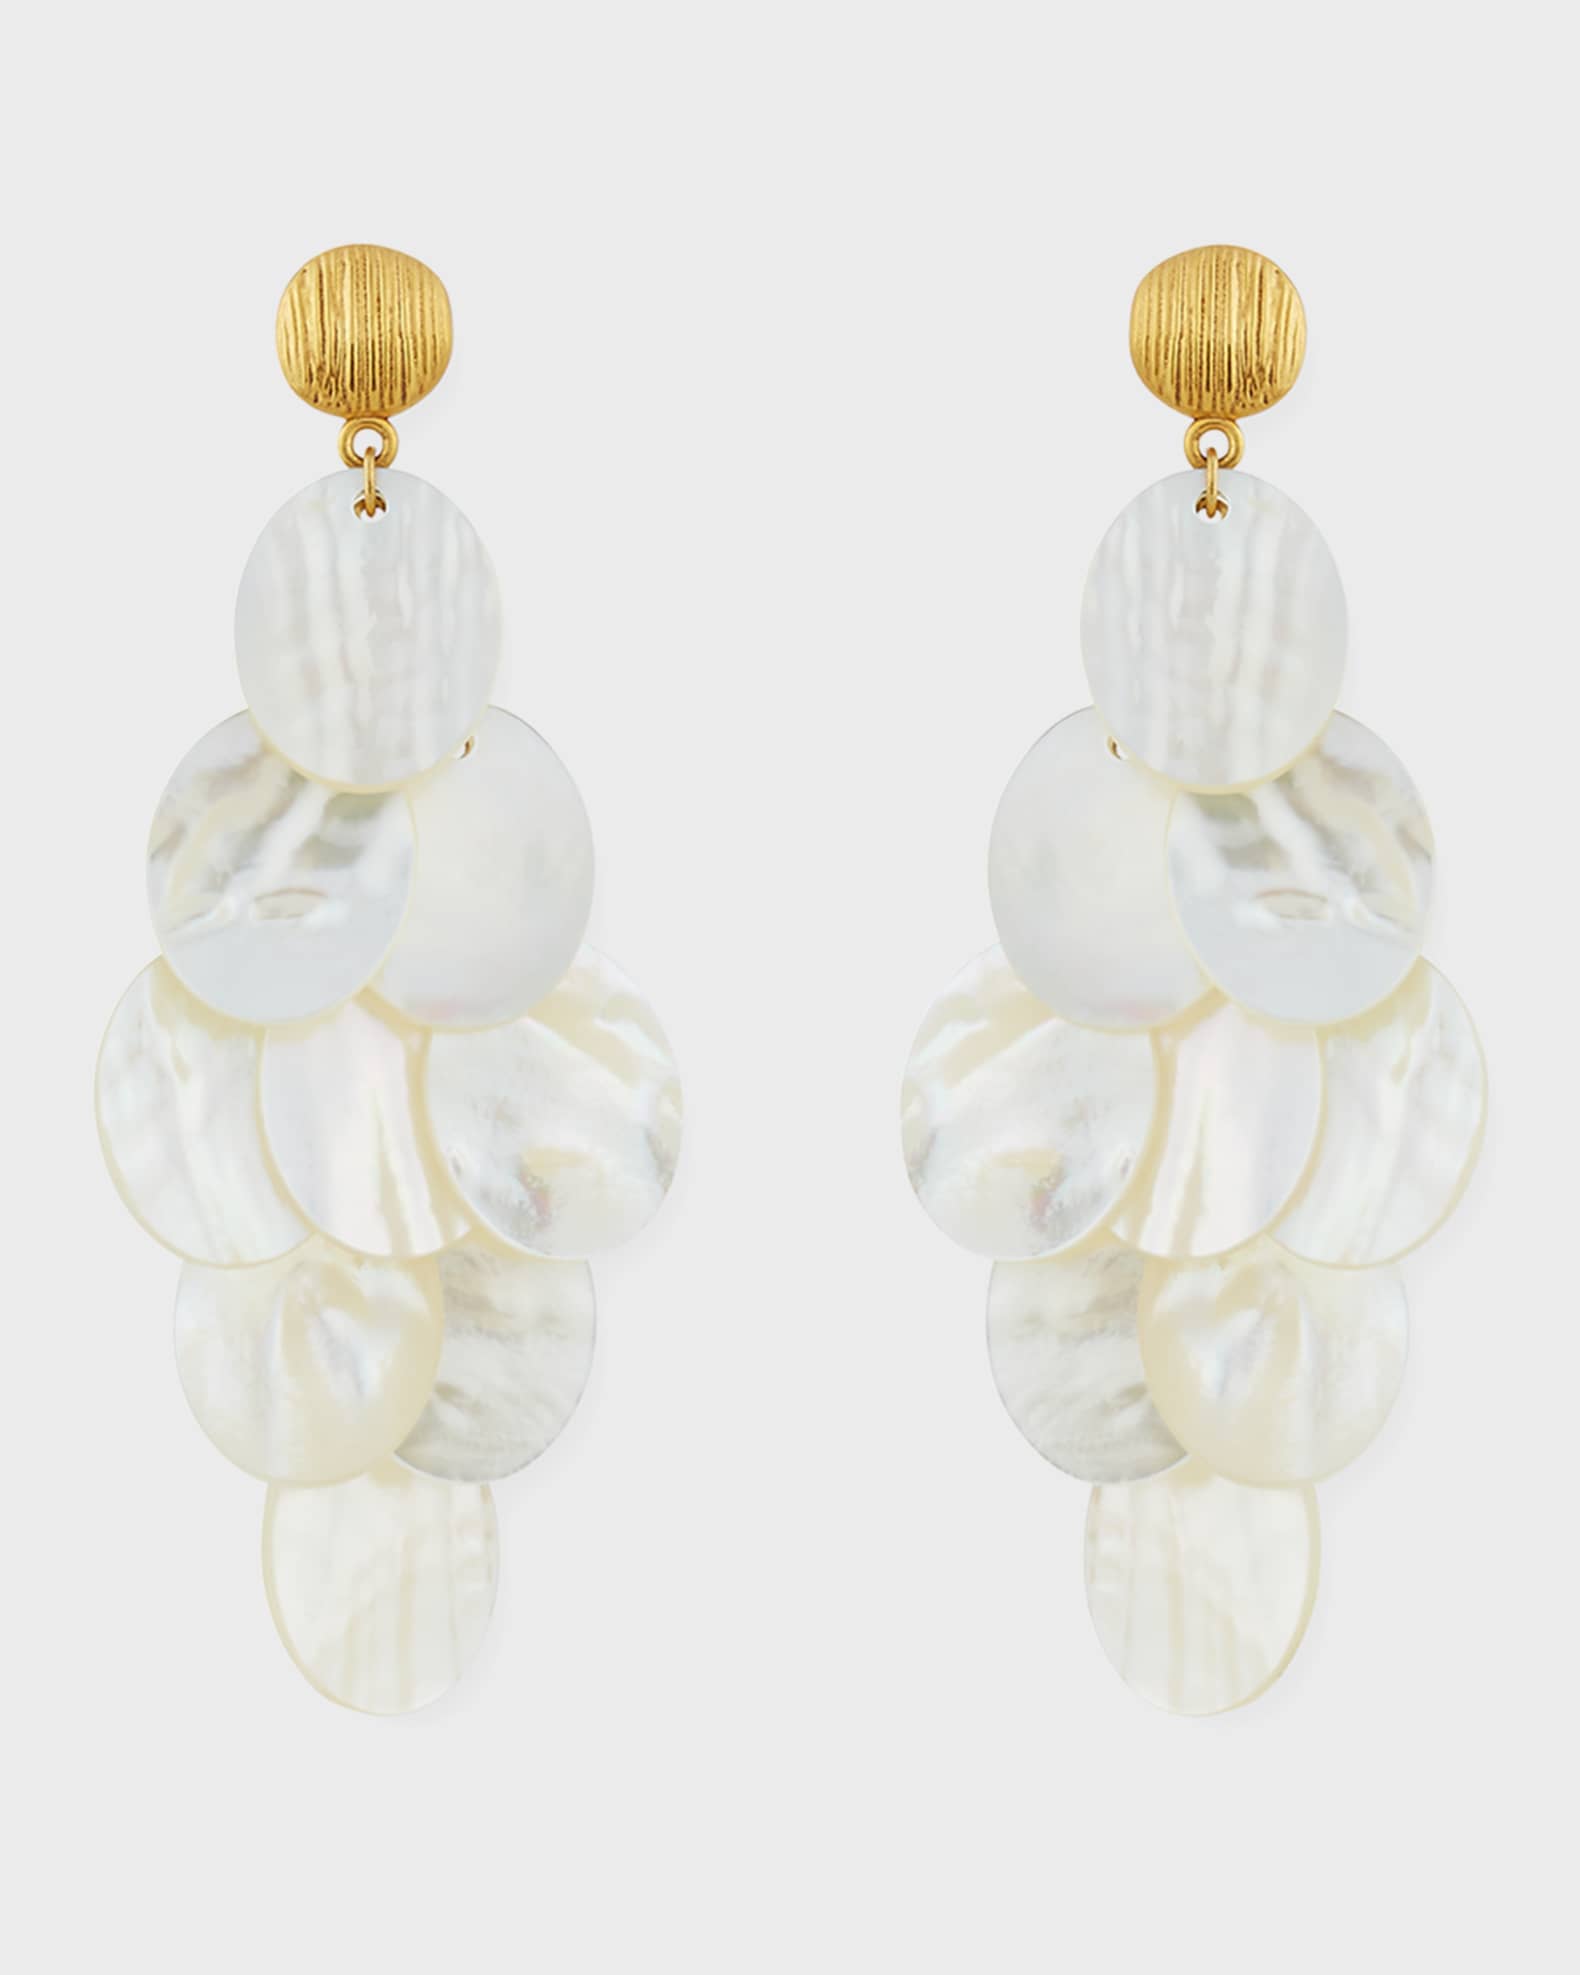 Blossom grey mother-of-pearl earrings, Louis Vuitton